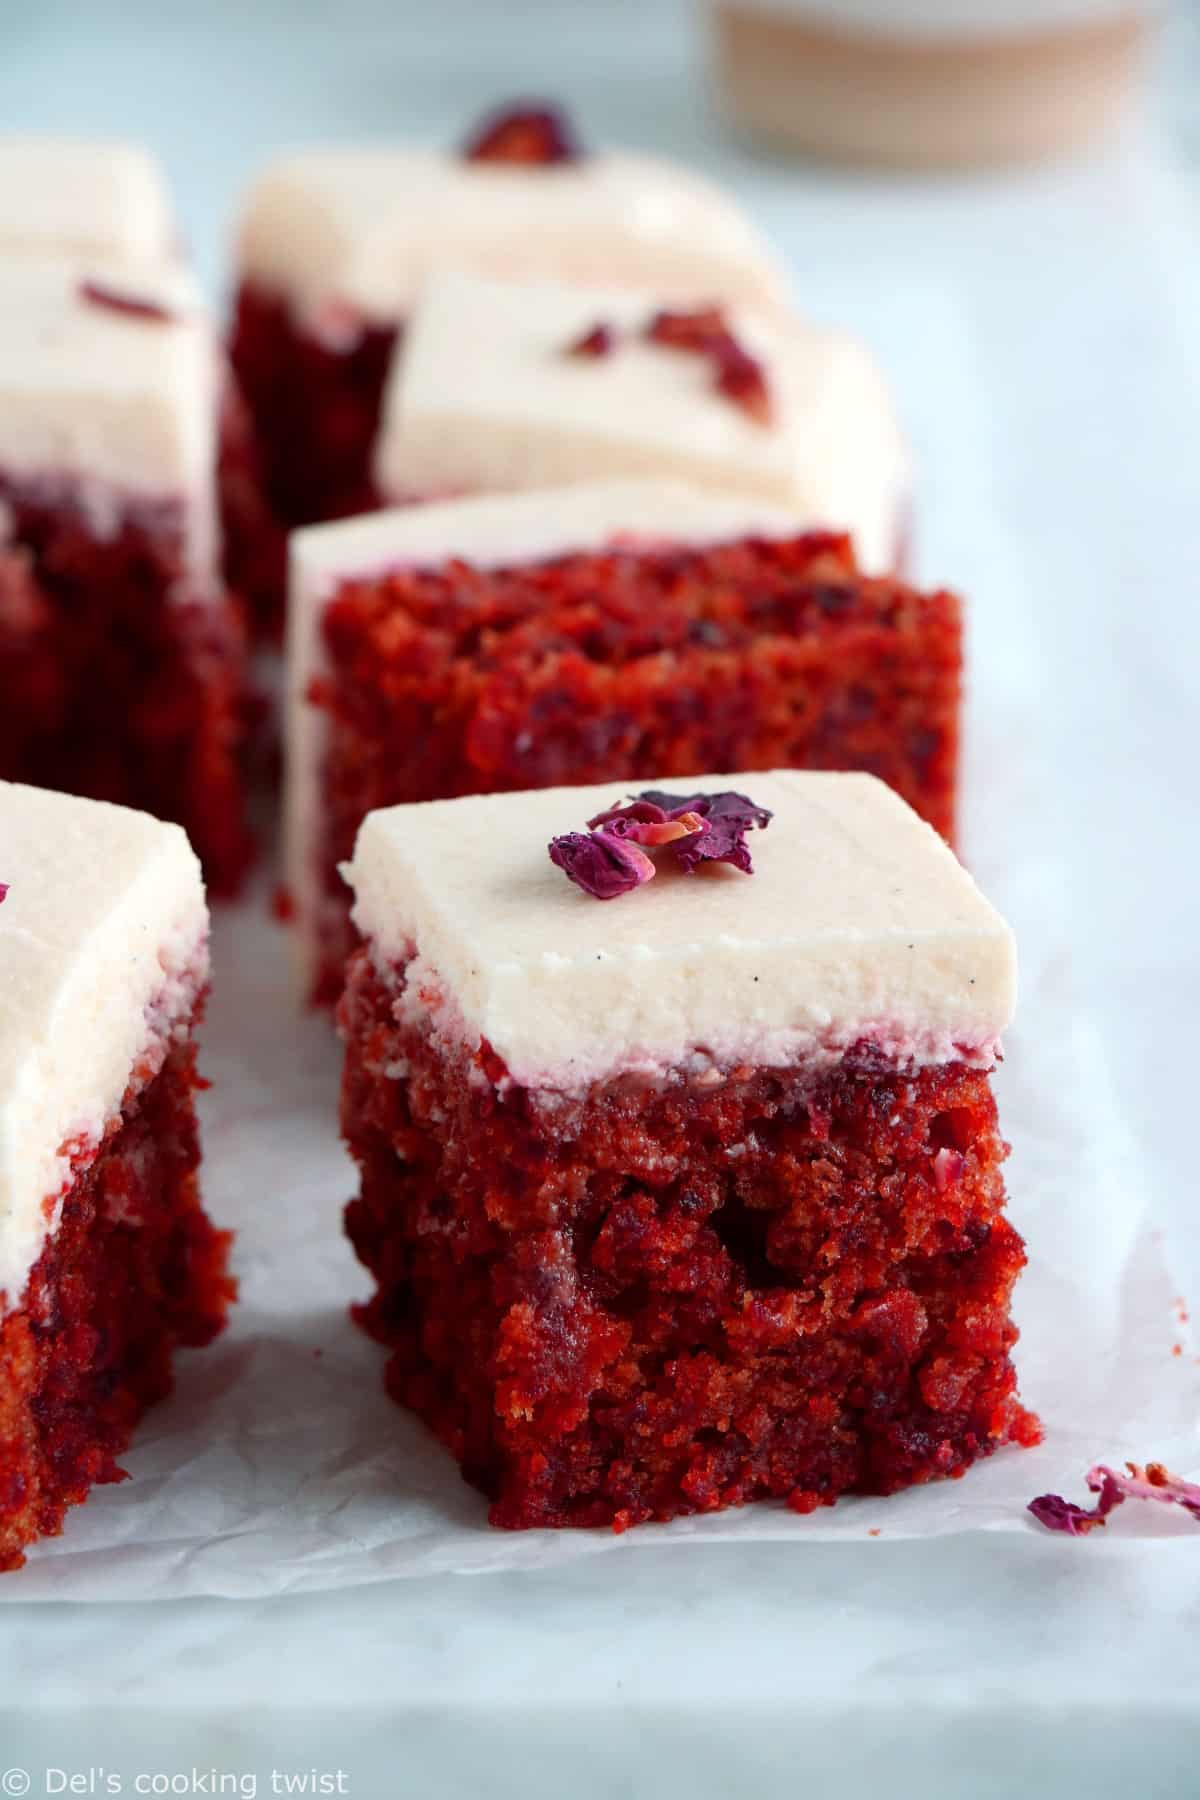 You will love this red velvet beetroot cake prepared without any food coloring.